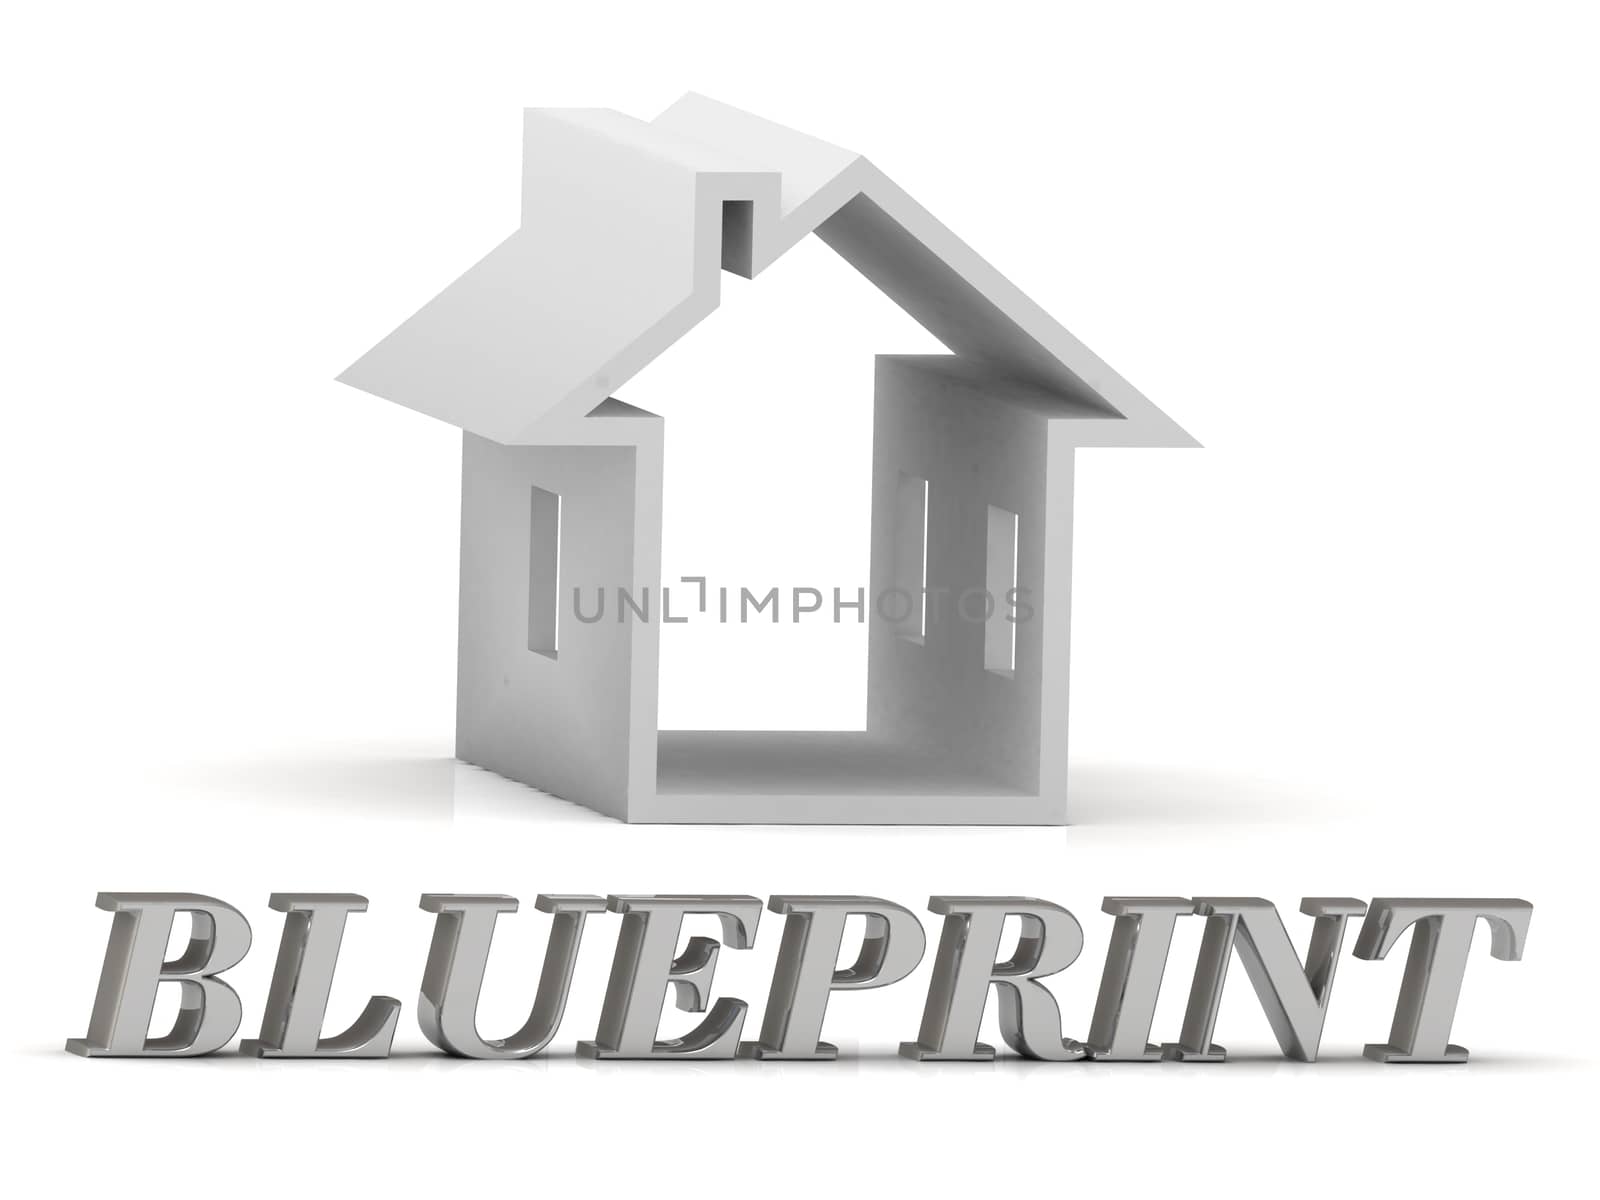 BLUEPRINT- inscription of silver letters and white house by GreenMost